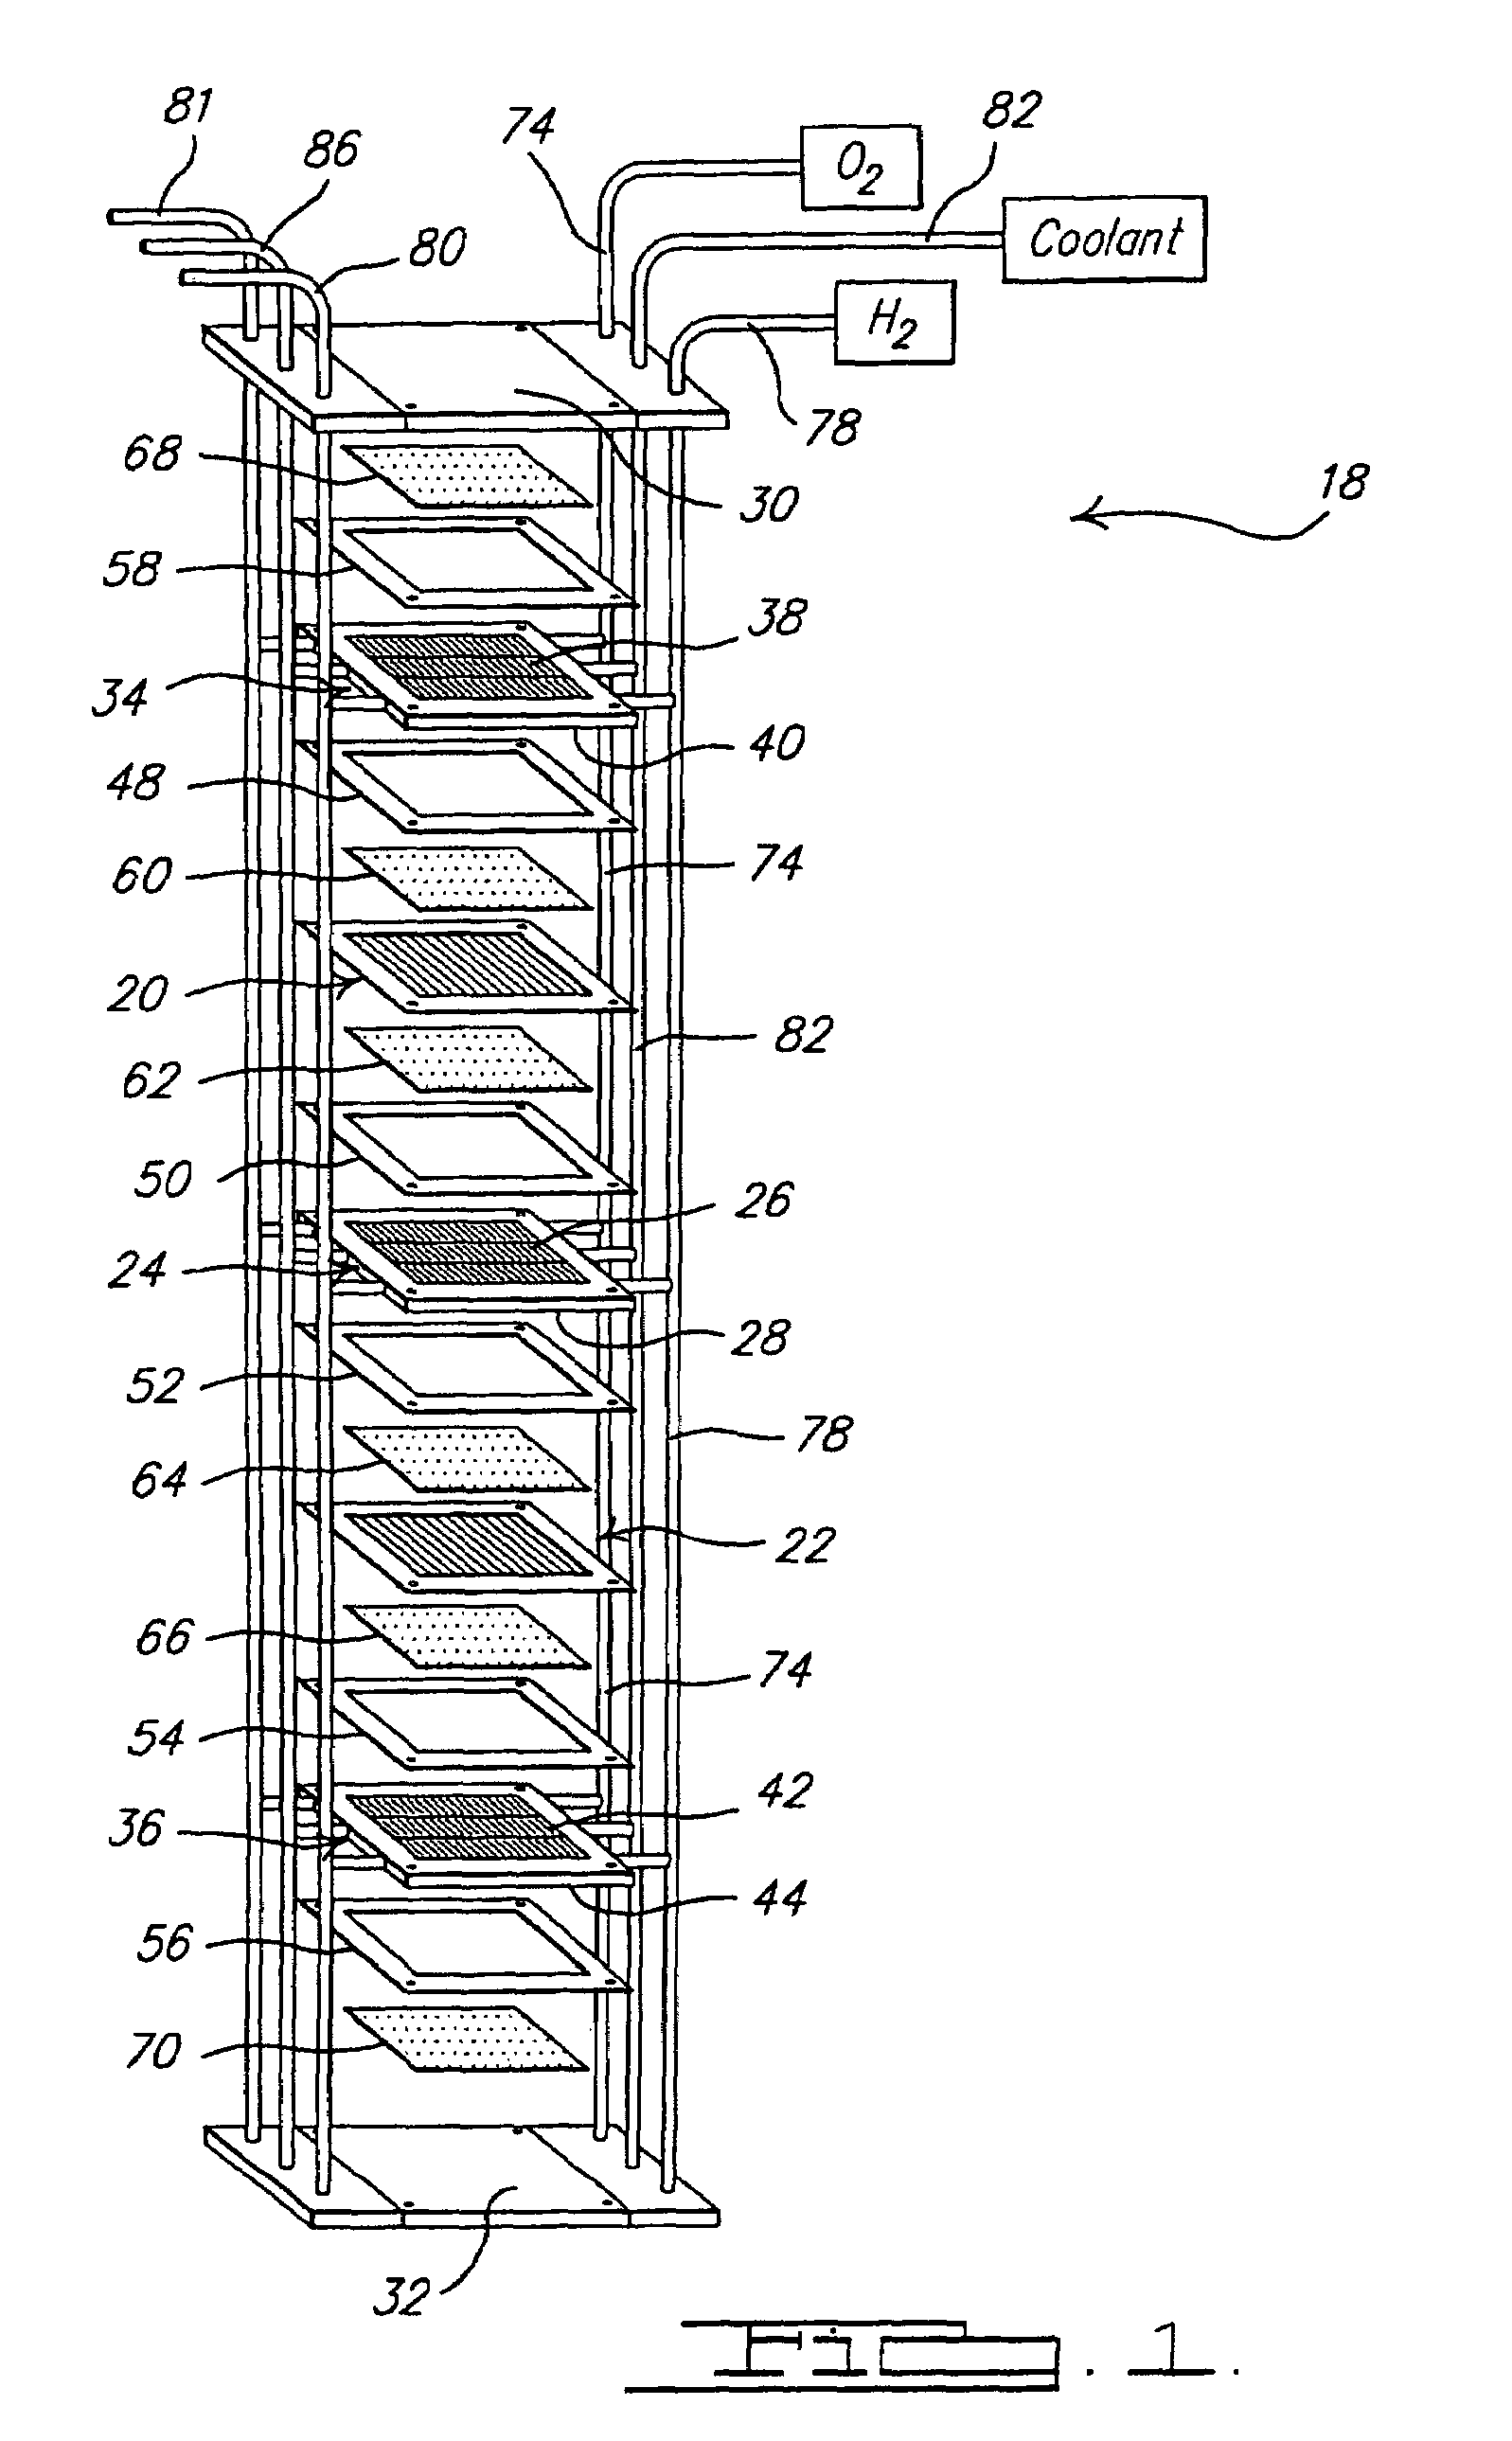 Variable active area for fuel cell